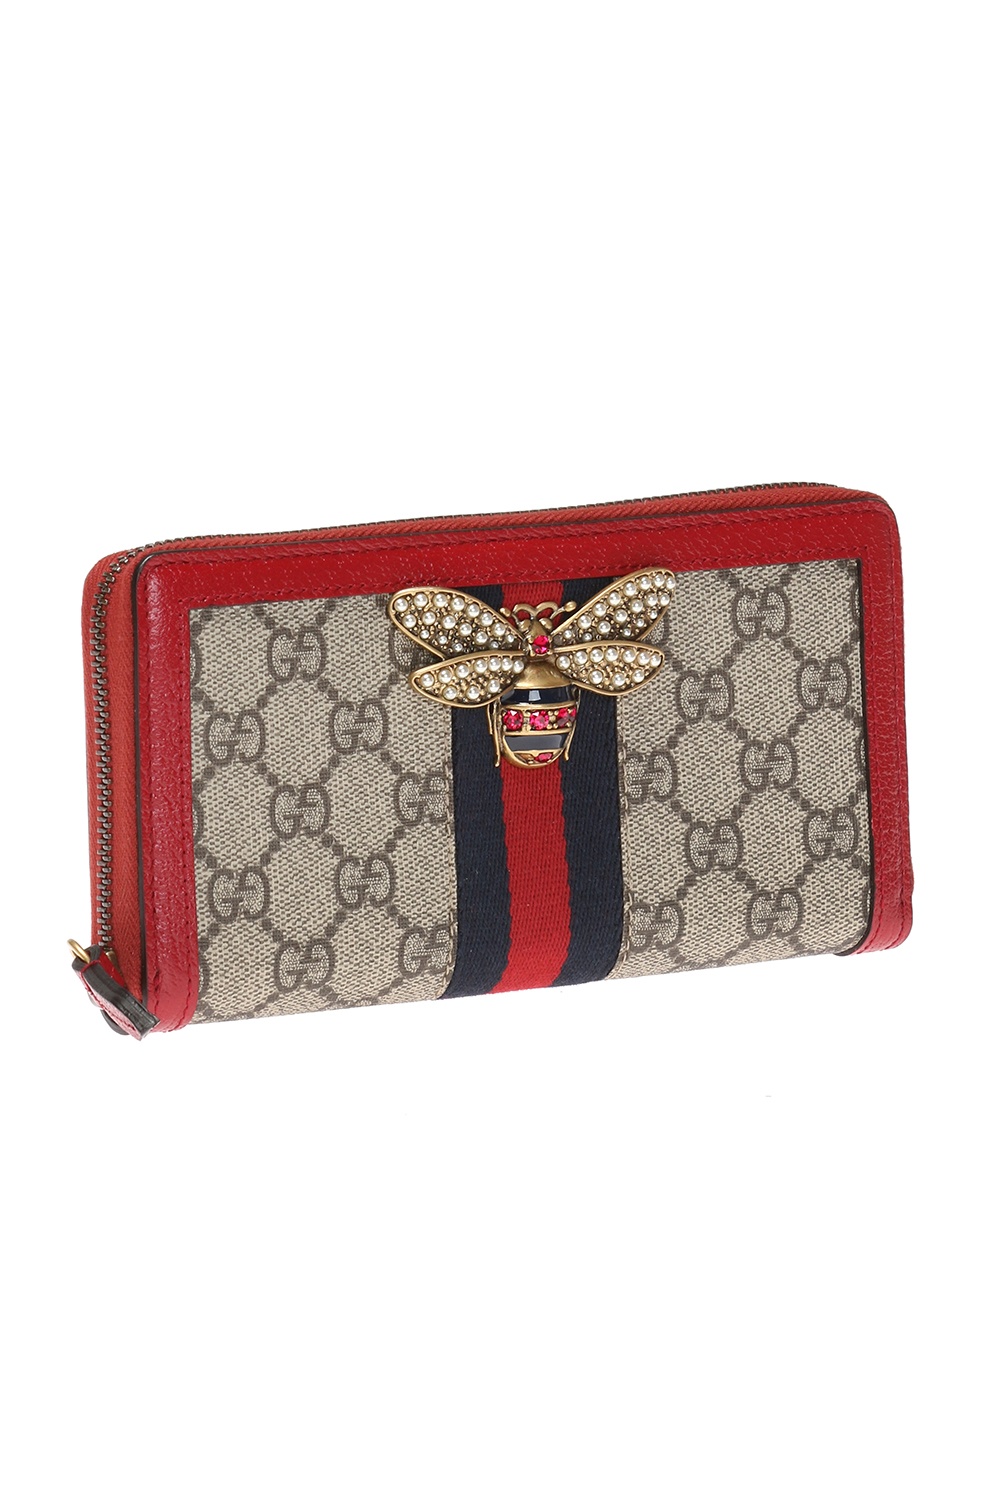 gucci wallet women red